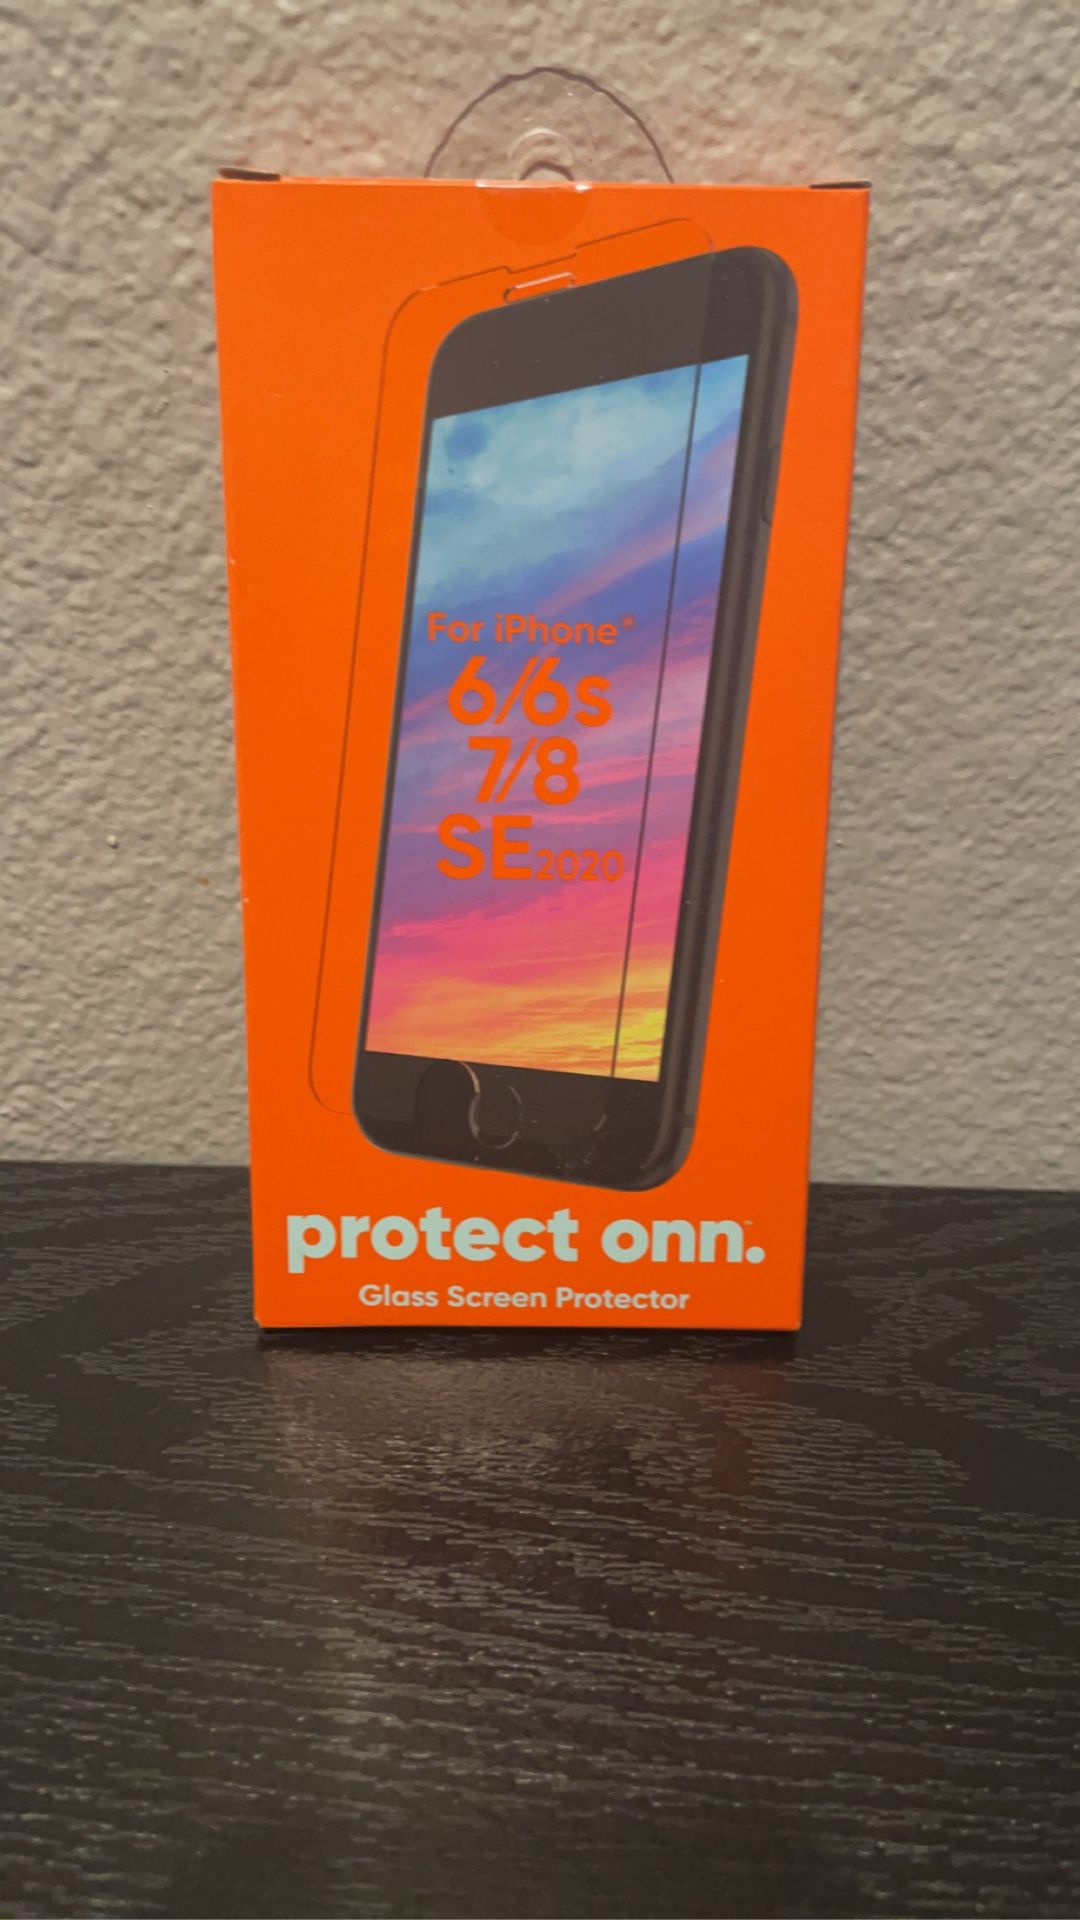 Protect Onn Iphone glass screen protector for 6/6s,  7/8 and SE 2020